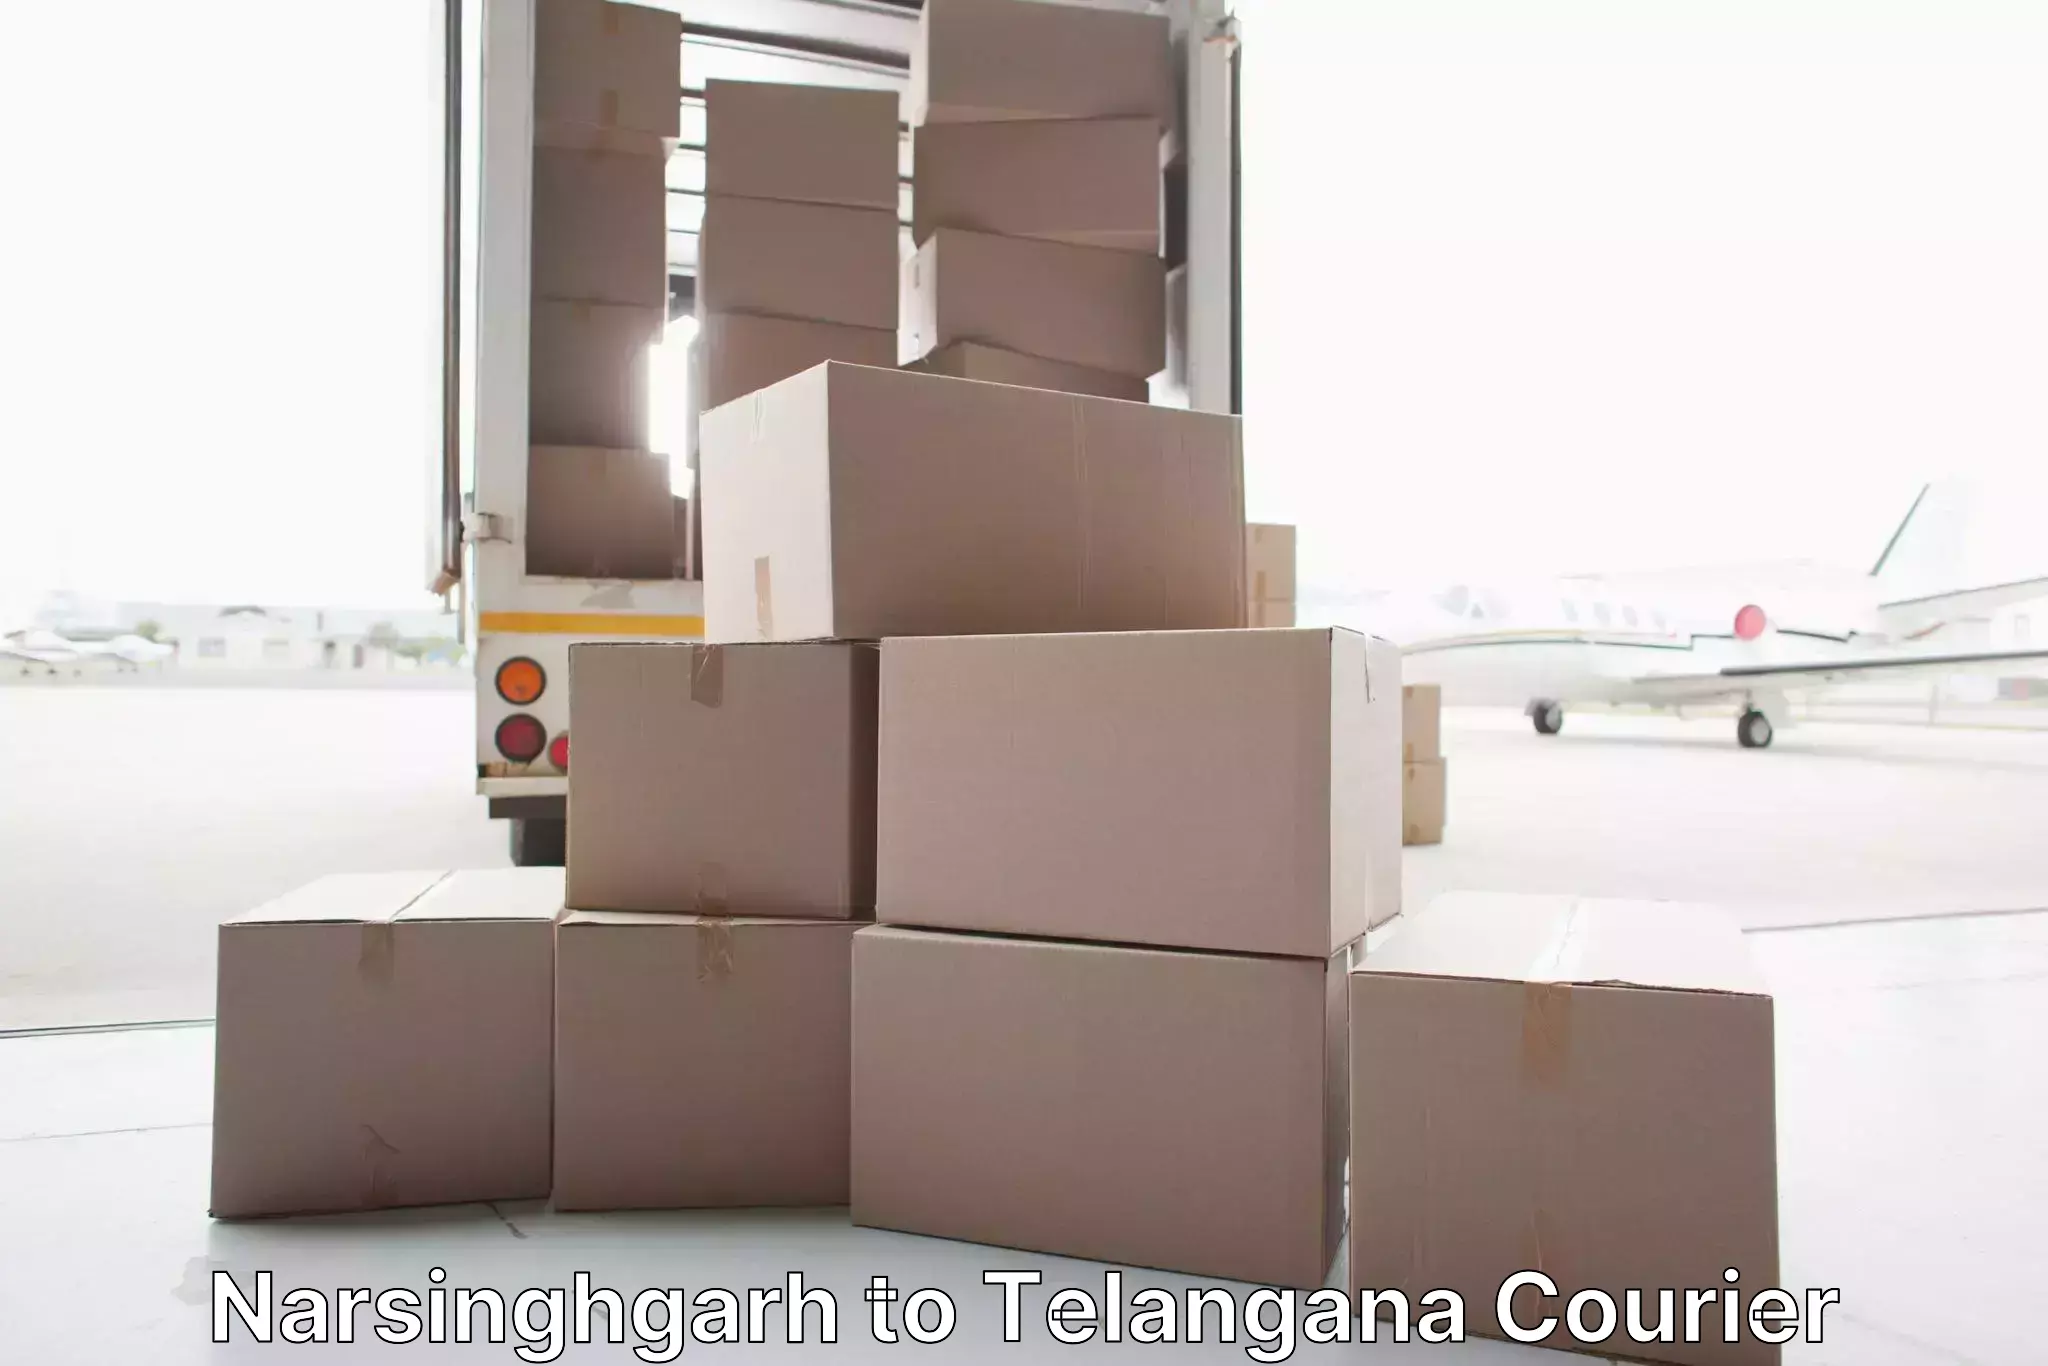 Professional home movers in Narsinghgarh to Hyderabad